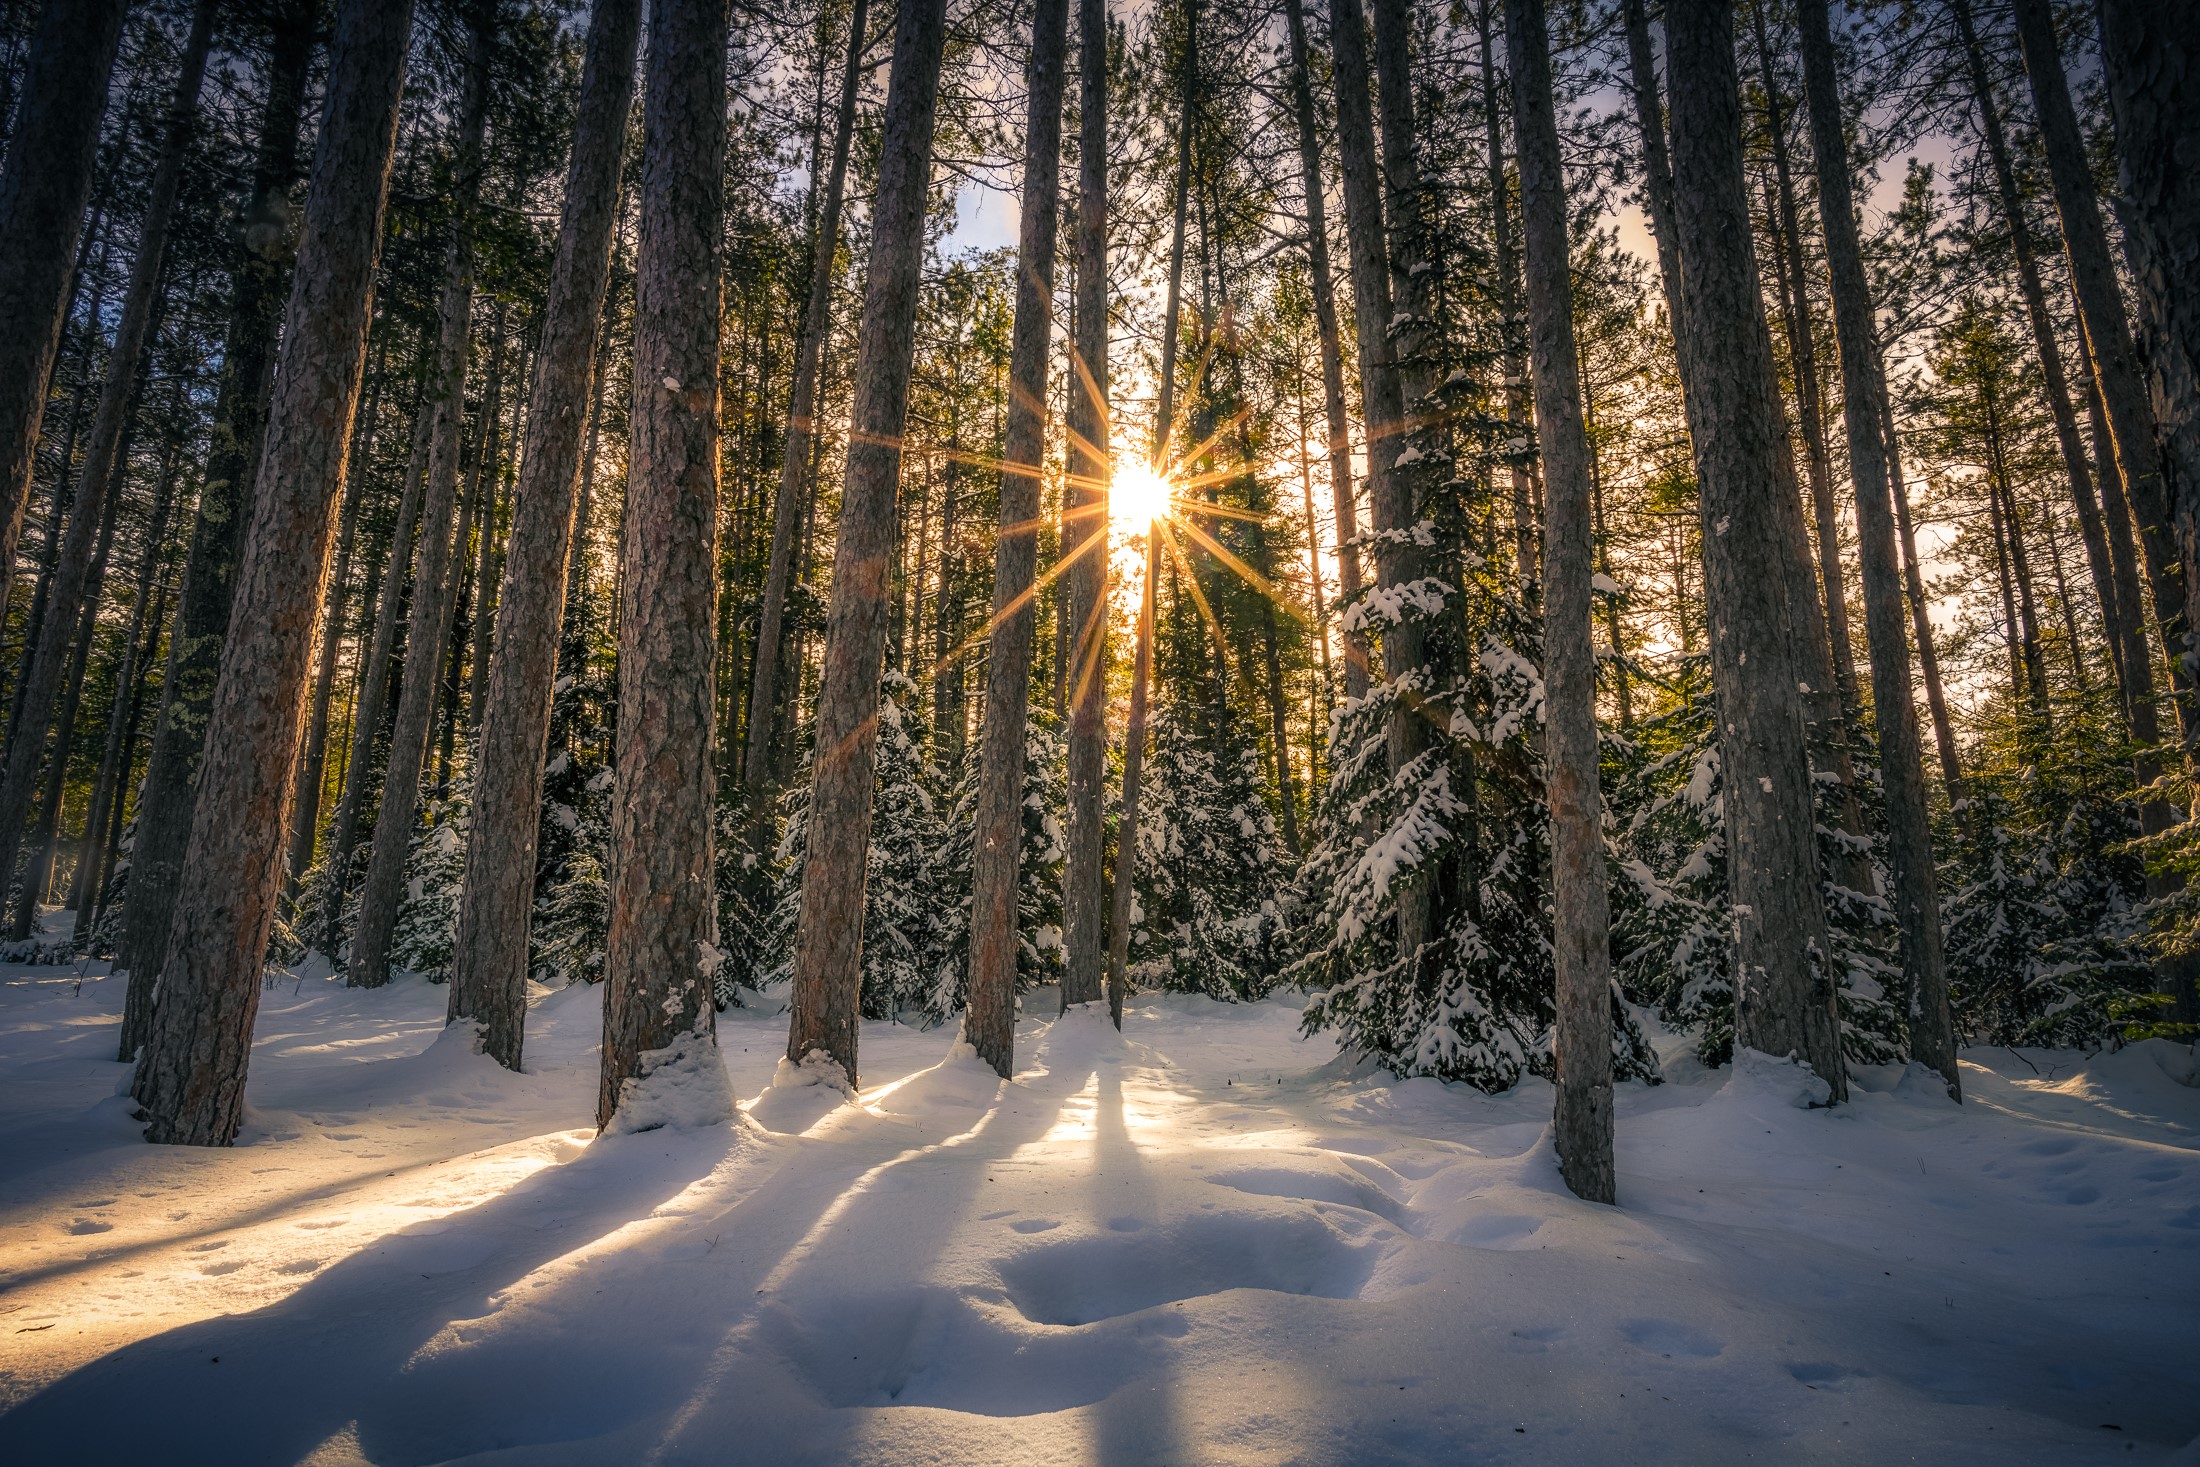 Winter forest scene with snow on the ground and beams of sunlight peaking through tall trees